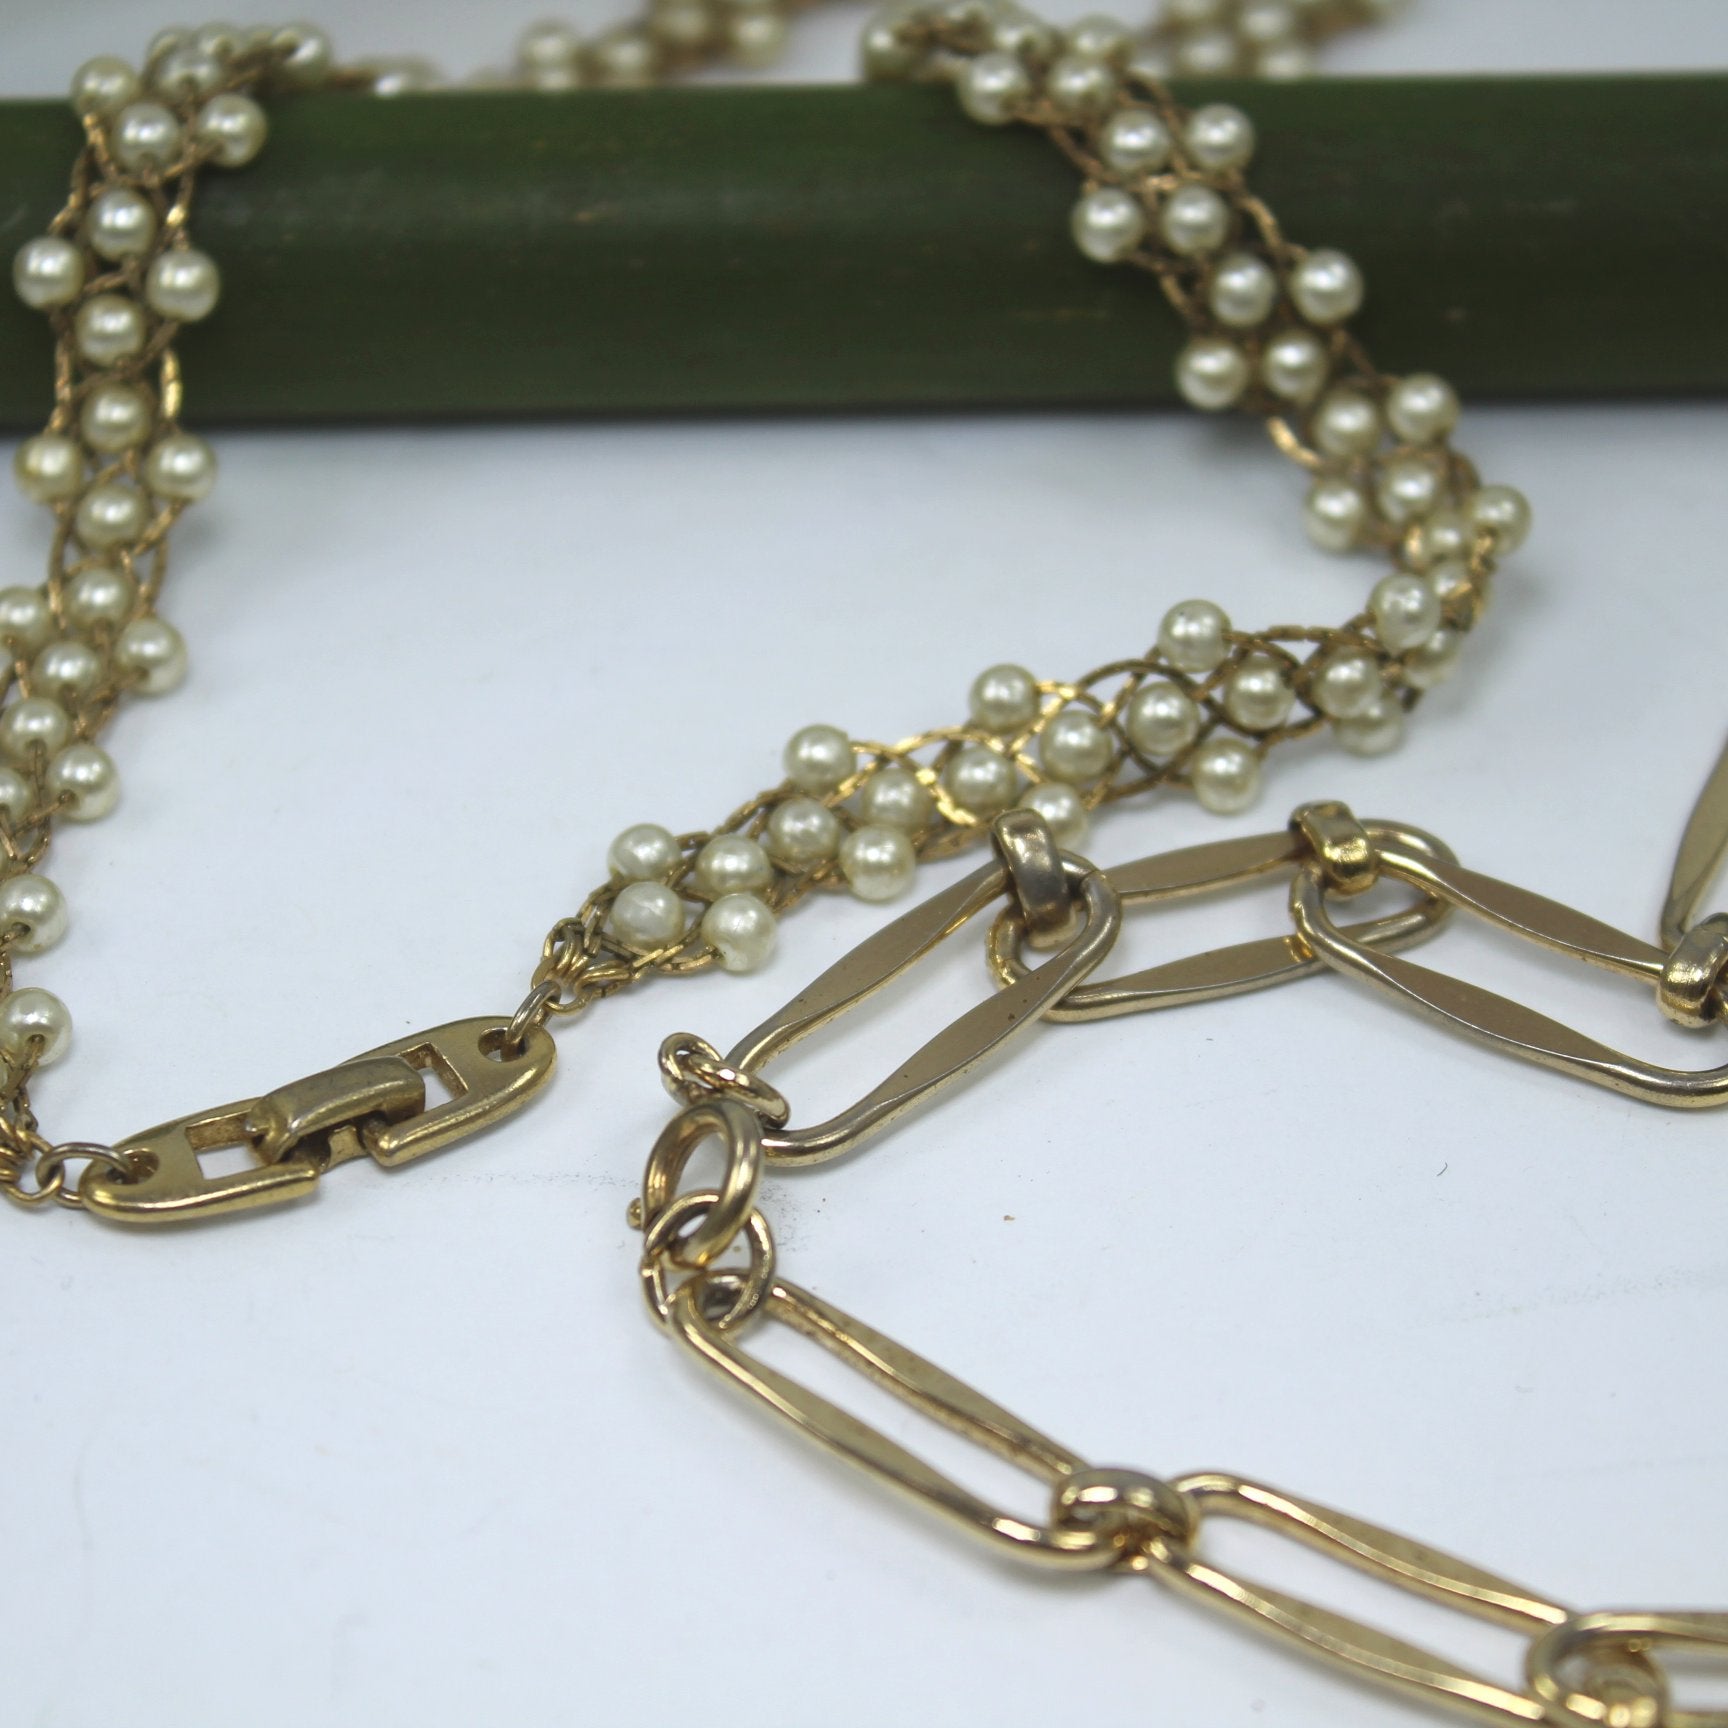 Two Napier Vintage Necklaces 30" Mod Oval Long Links 16" Pearl Gold Chain Woven closeup view chains